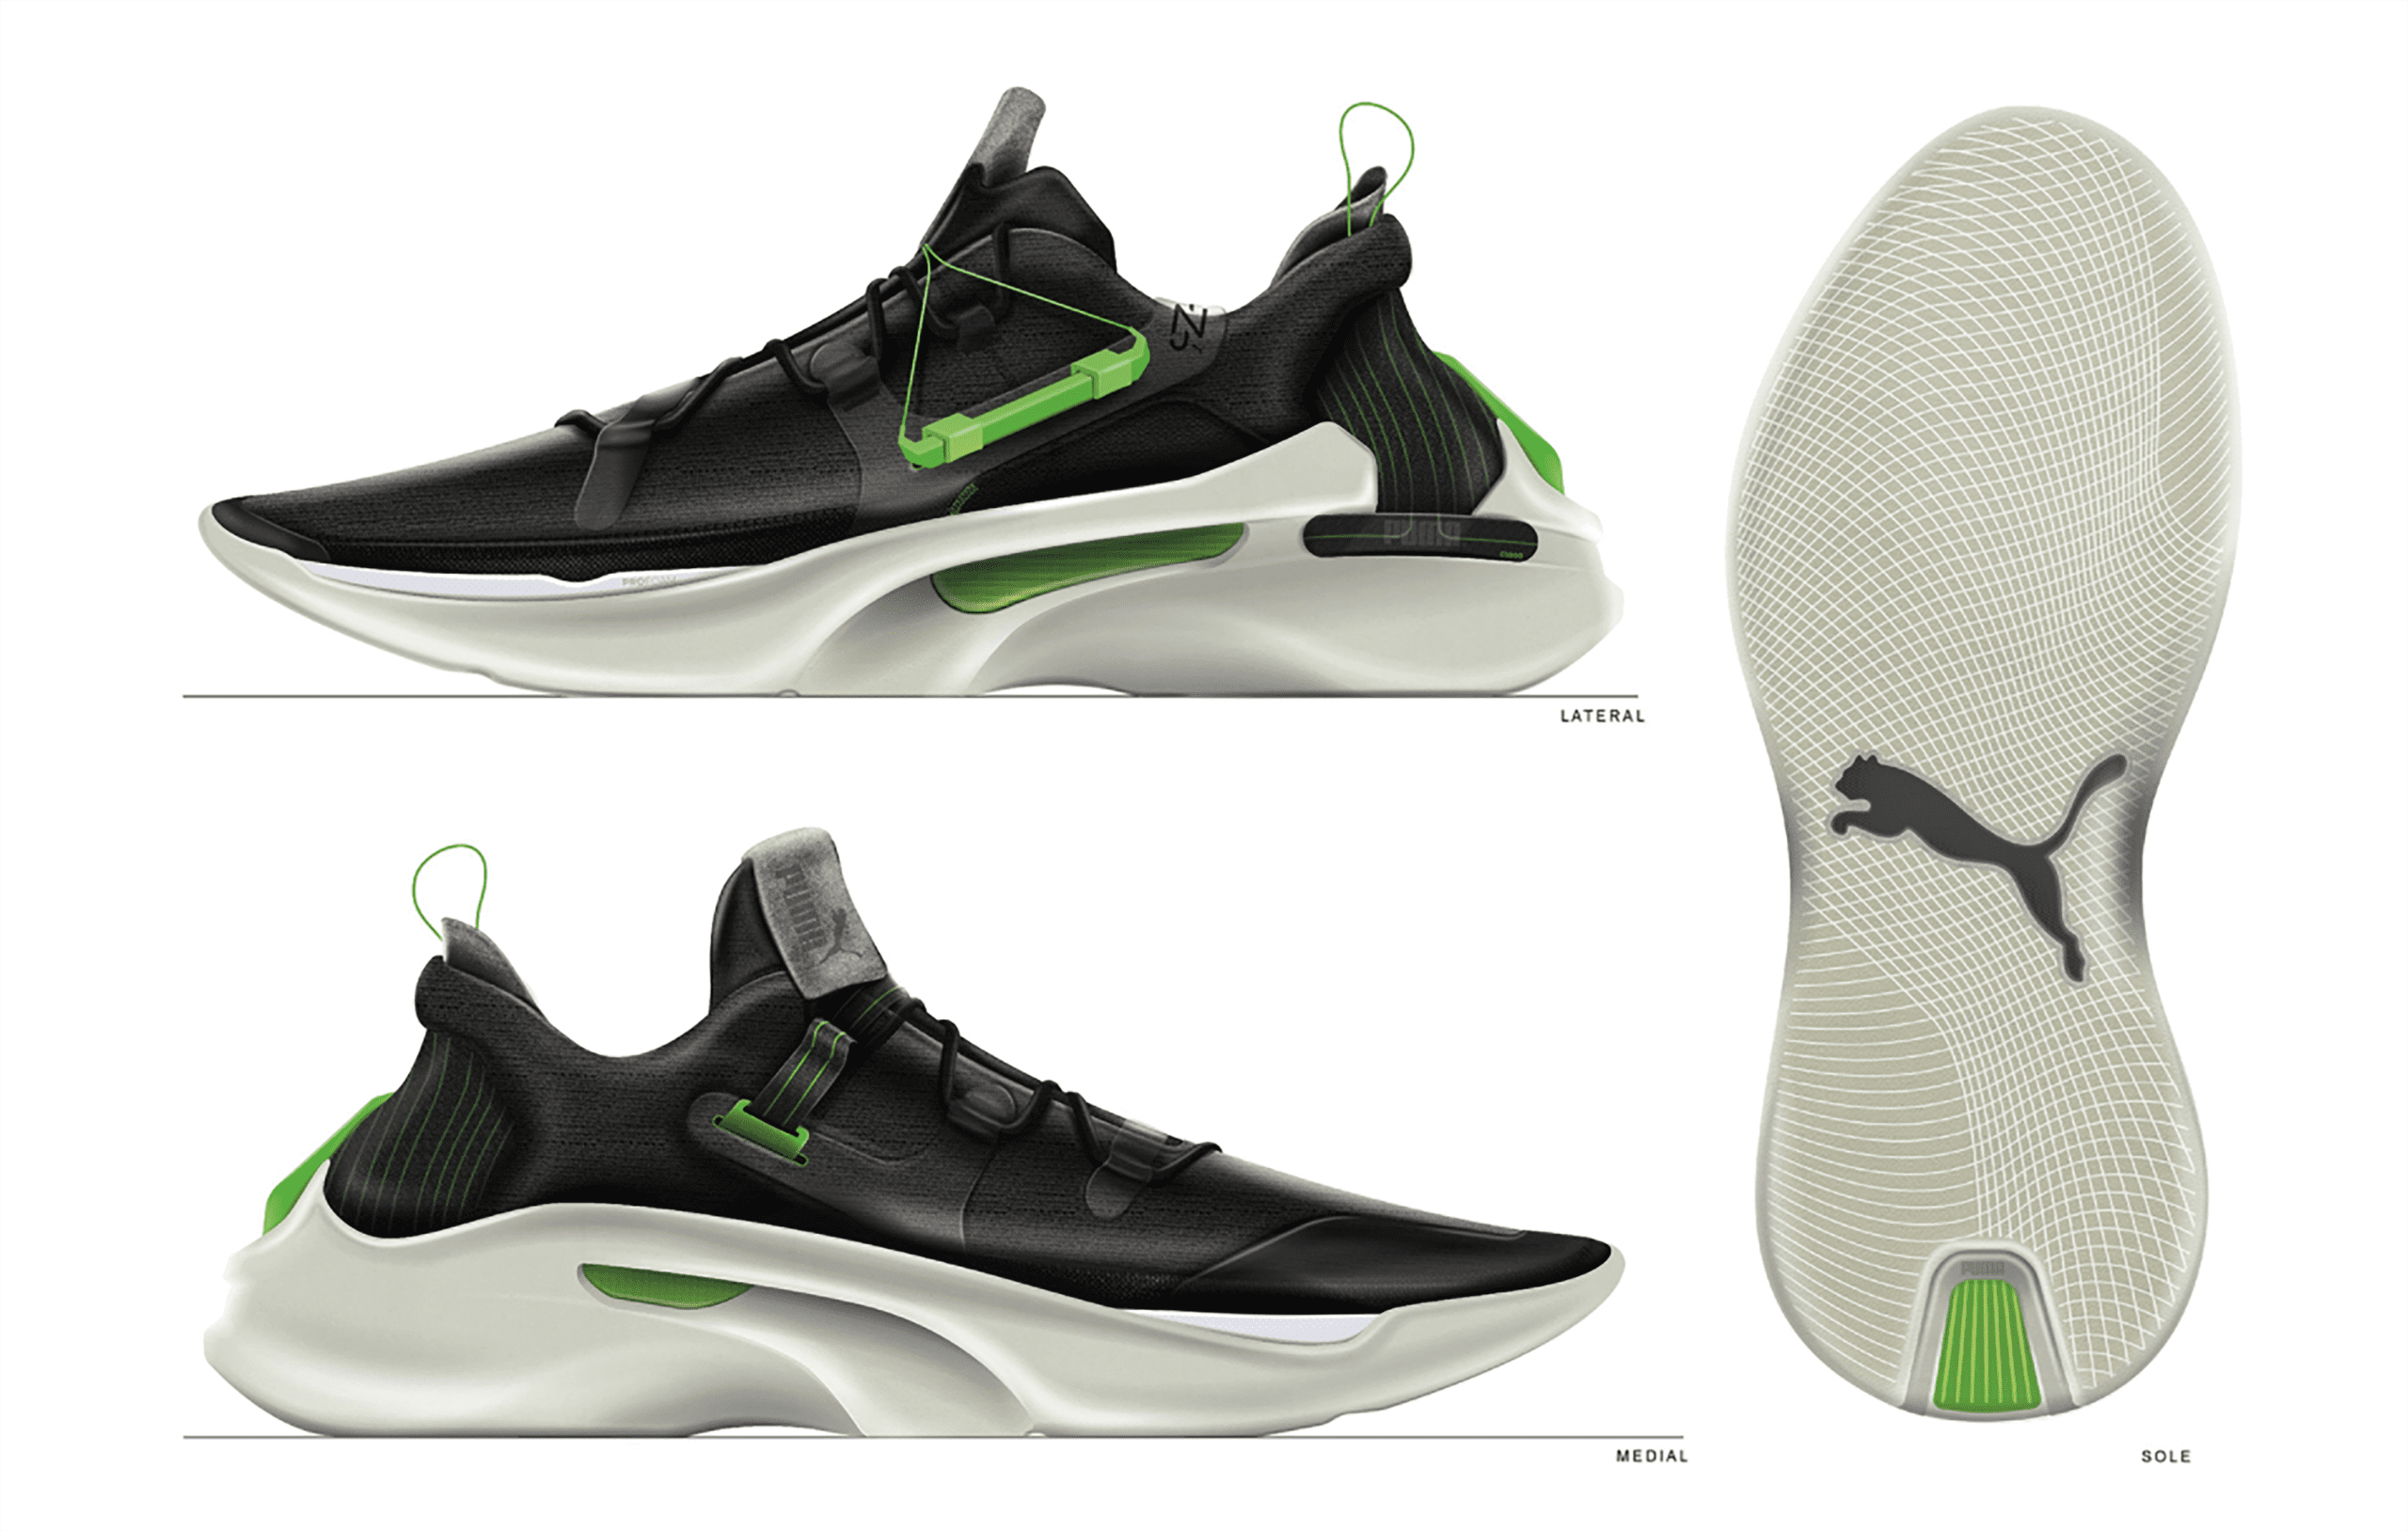 Digital image of three views a Puma shoe. One shoe is facing to the left, the one below is facing to the right, and the largest is a bottom view. The shoe is back with white bottoms and light green detailing. The bottom of the shoe has a black Puma logo.